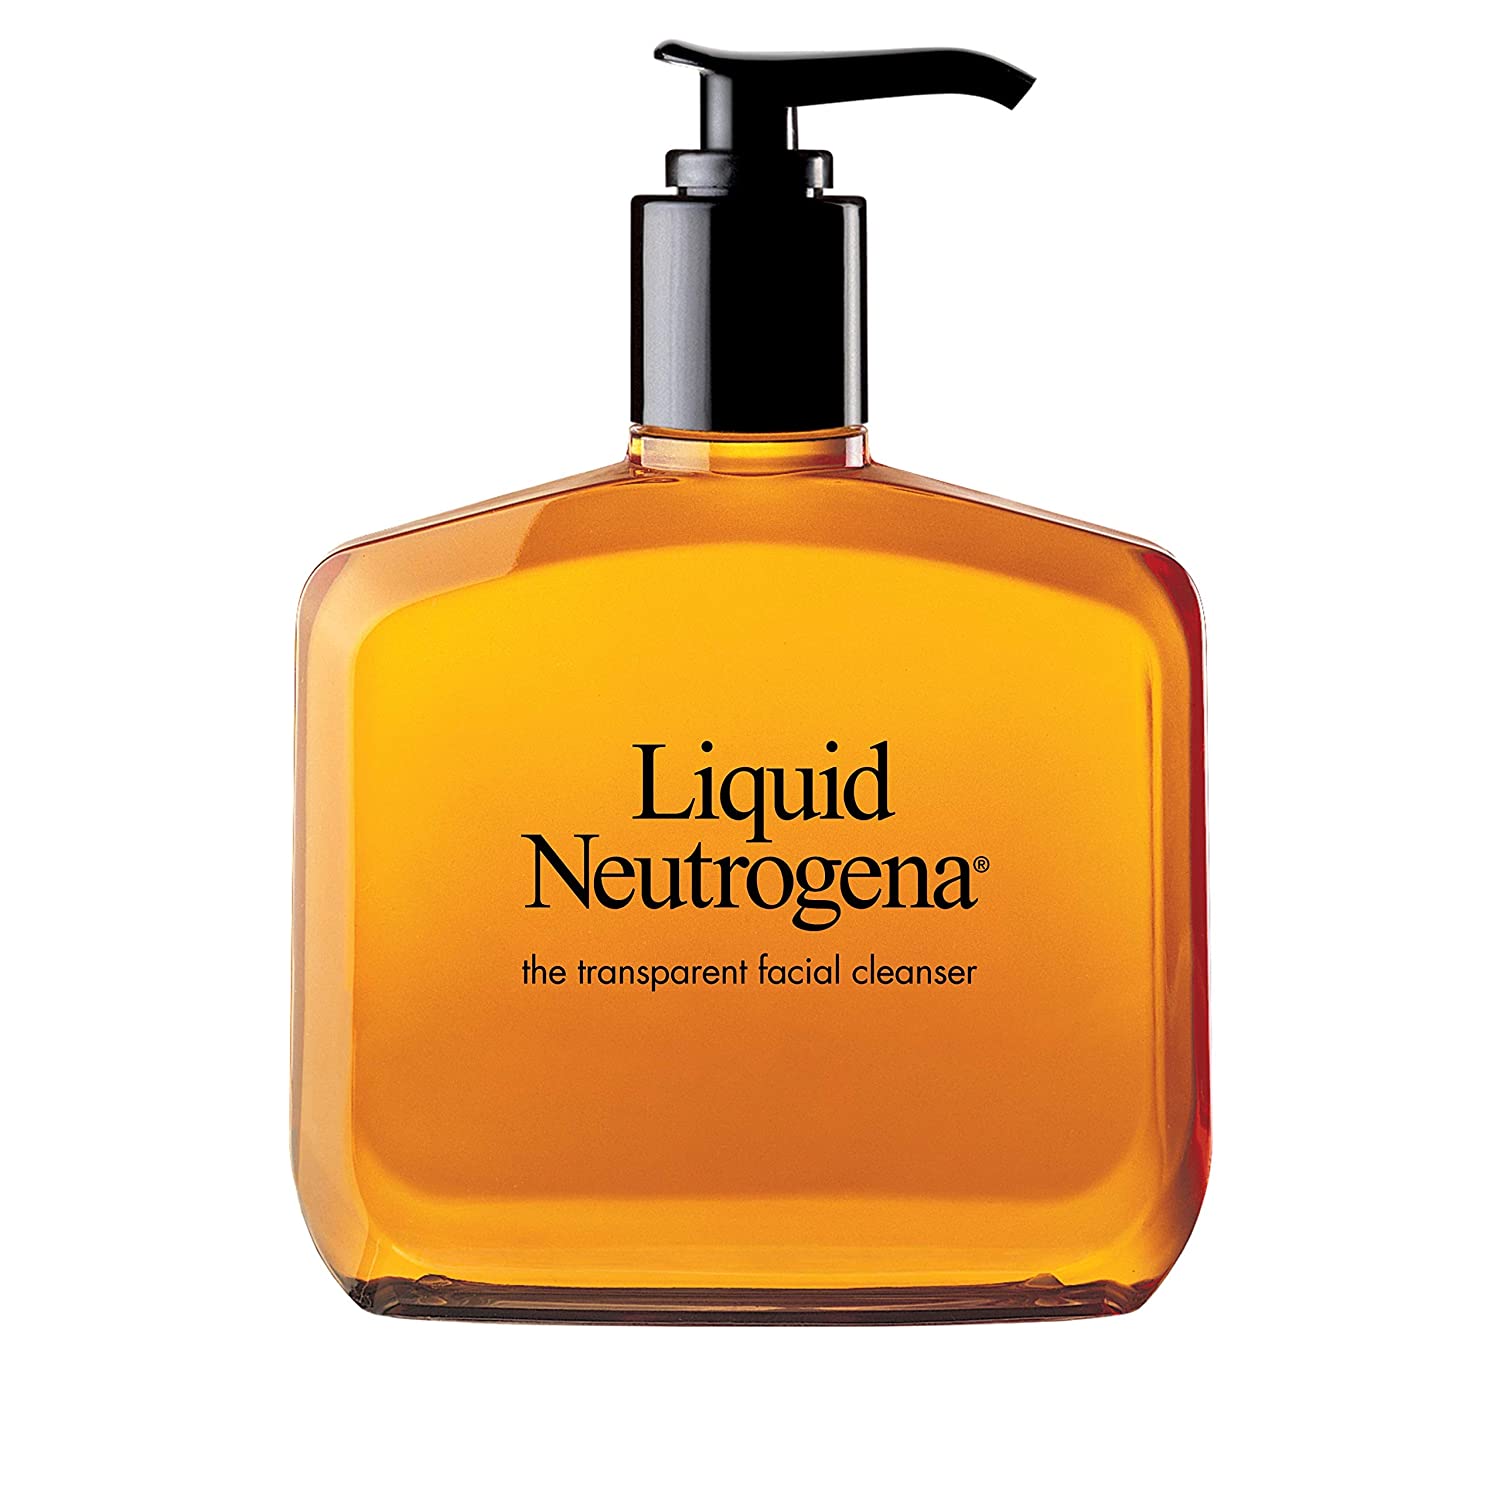 8-Oz Neutrogena Liquid Fragrance-Free Gentle Facial Cleanser $4.40 w/ S&S + Free Shipping w/ Prime or on orders $25+